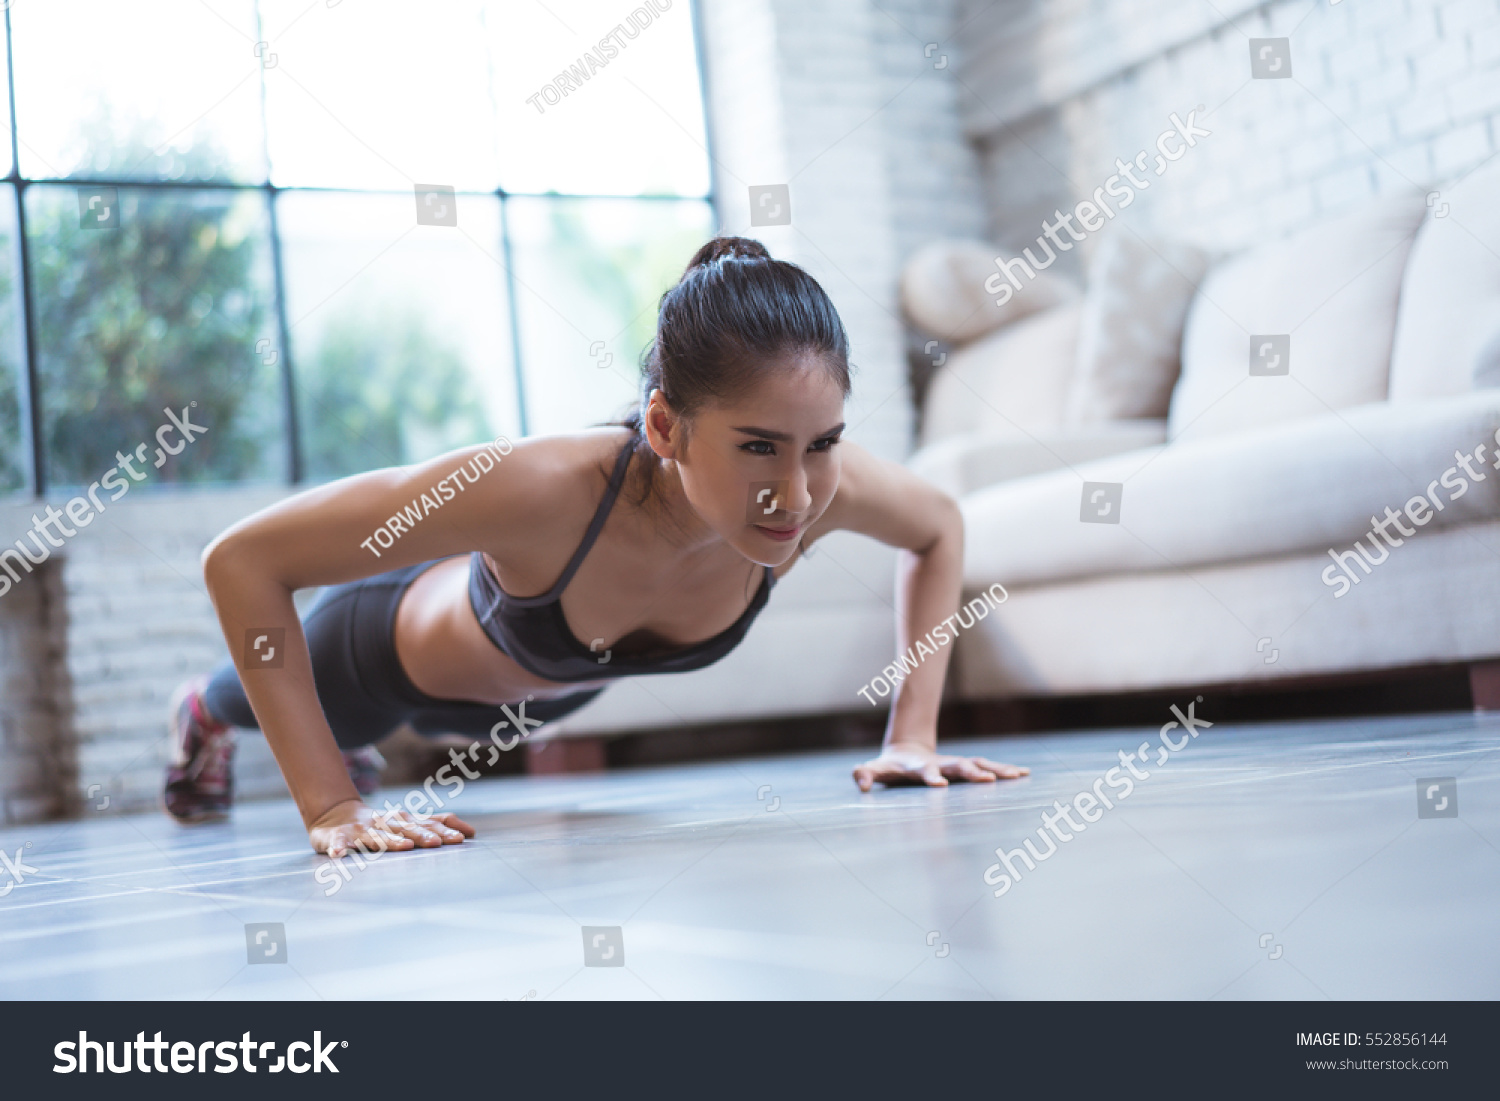 Asian women exercise indoor at home she is acted "push up" #552856144